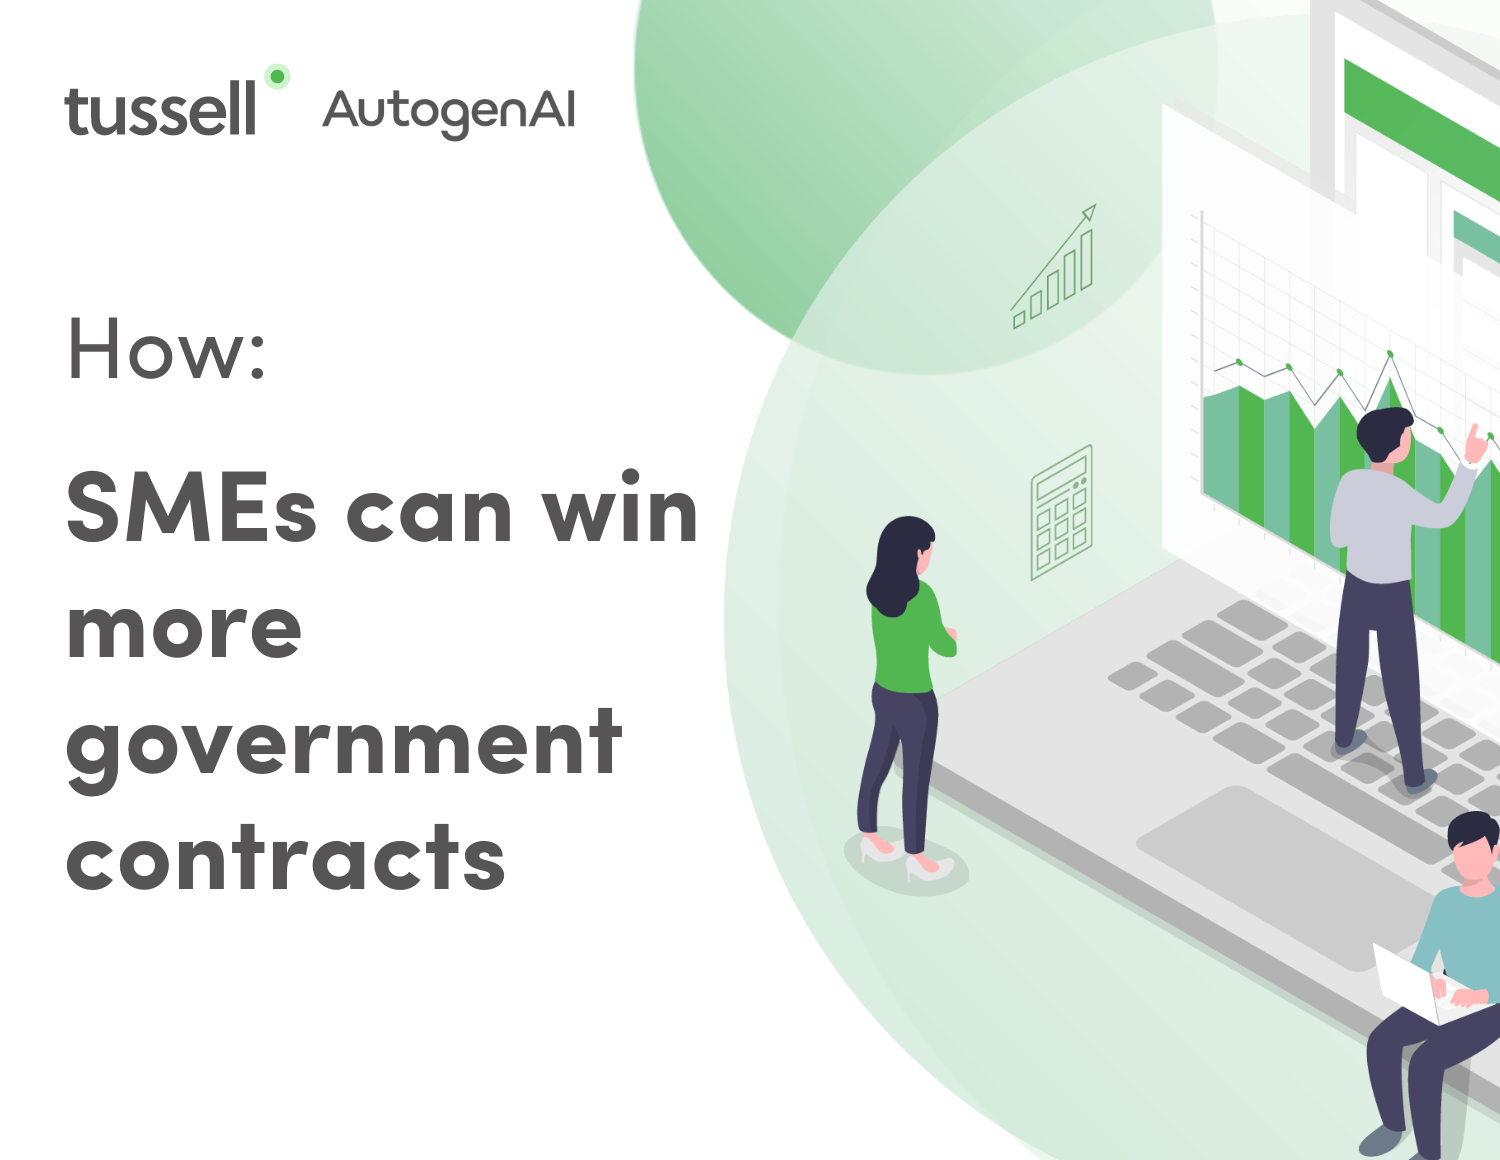 How SMEs can win more government contracts